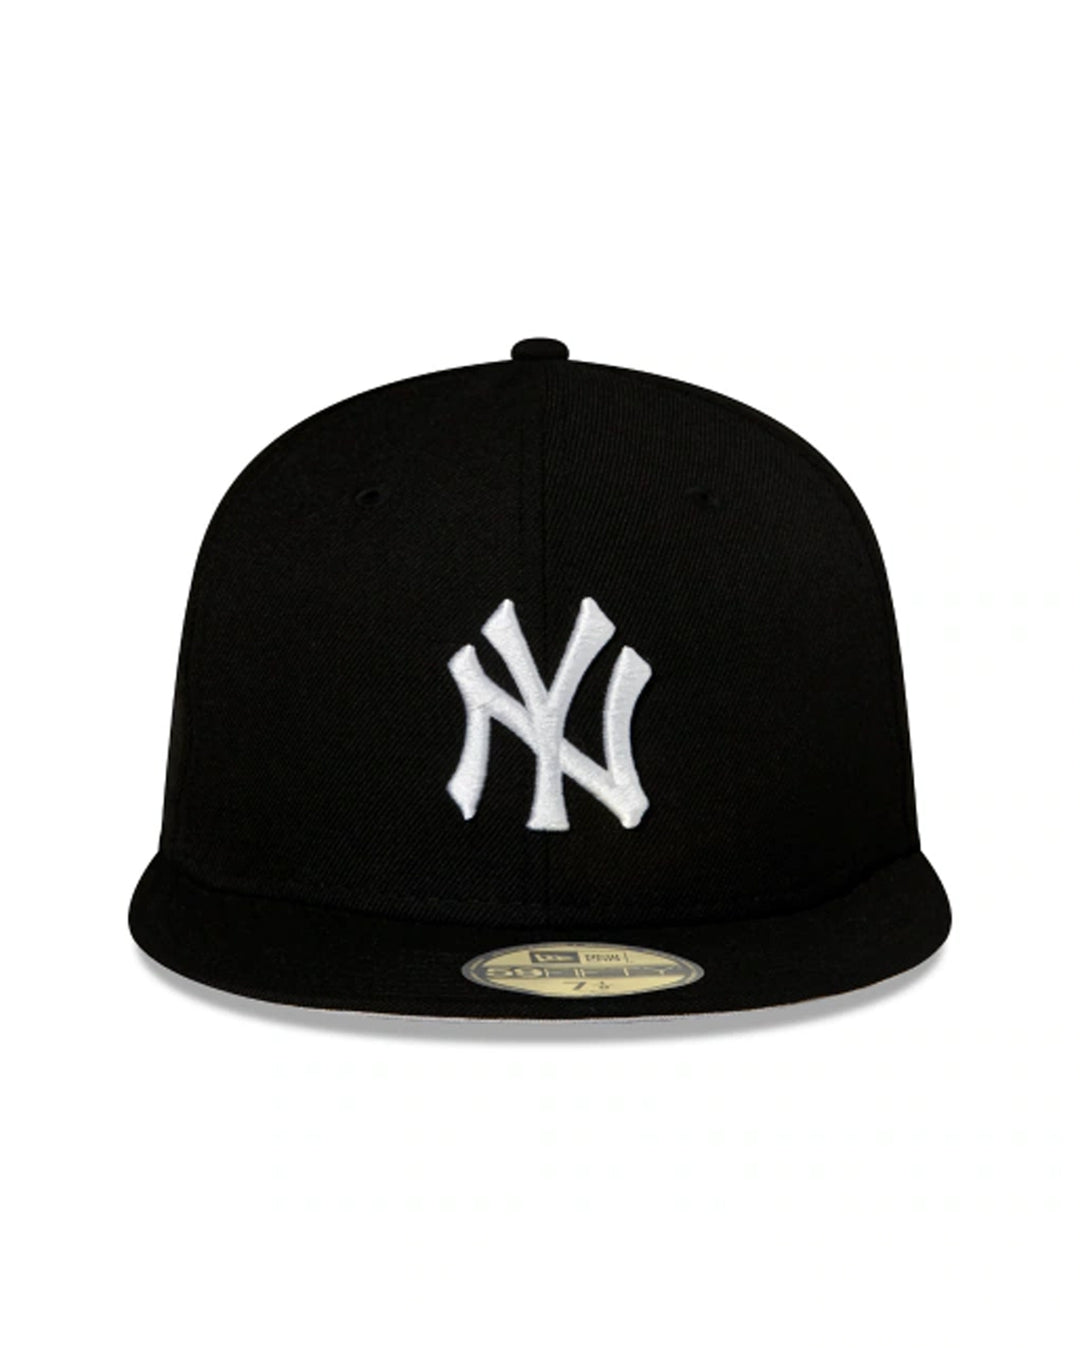 New York Yankees Black 59FIFTY Fitted